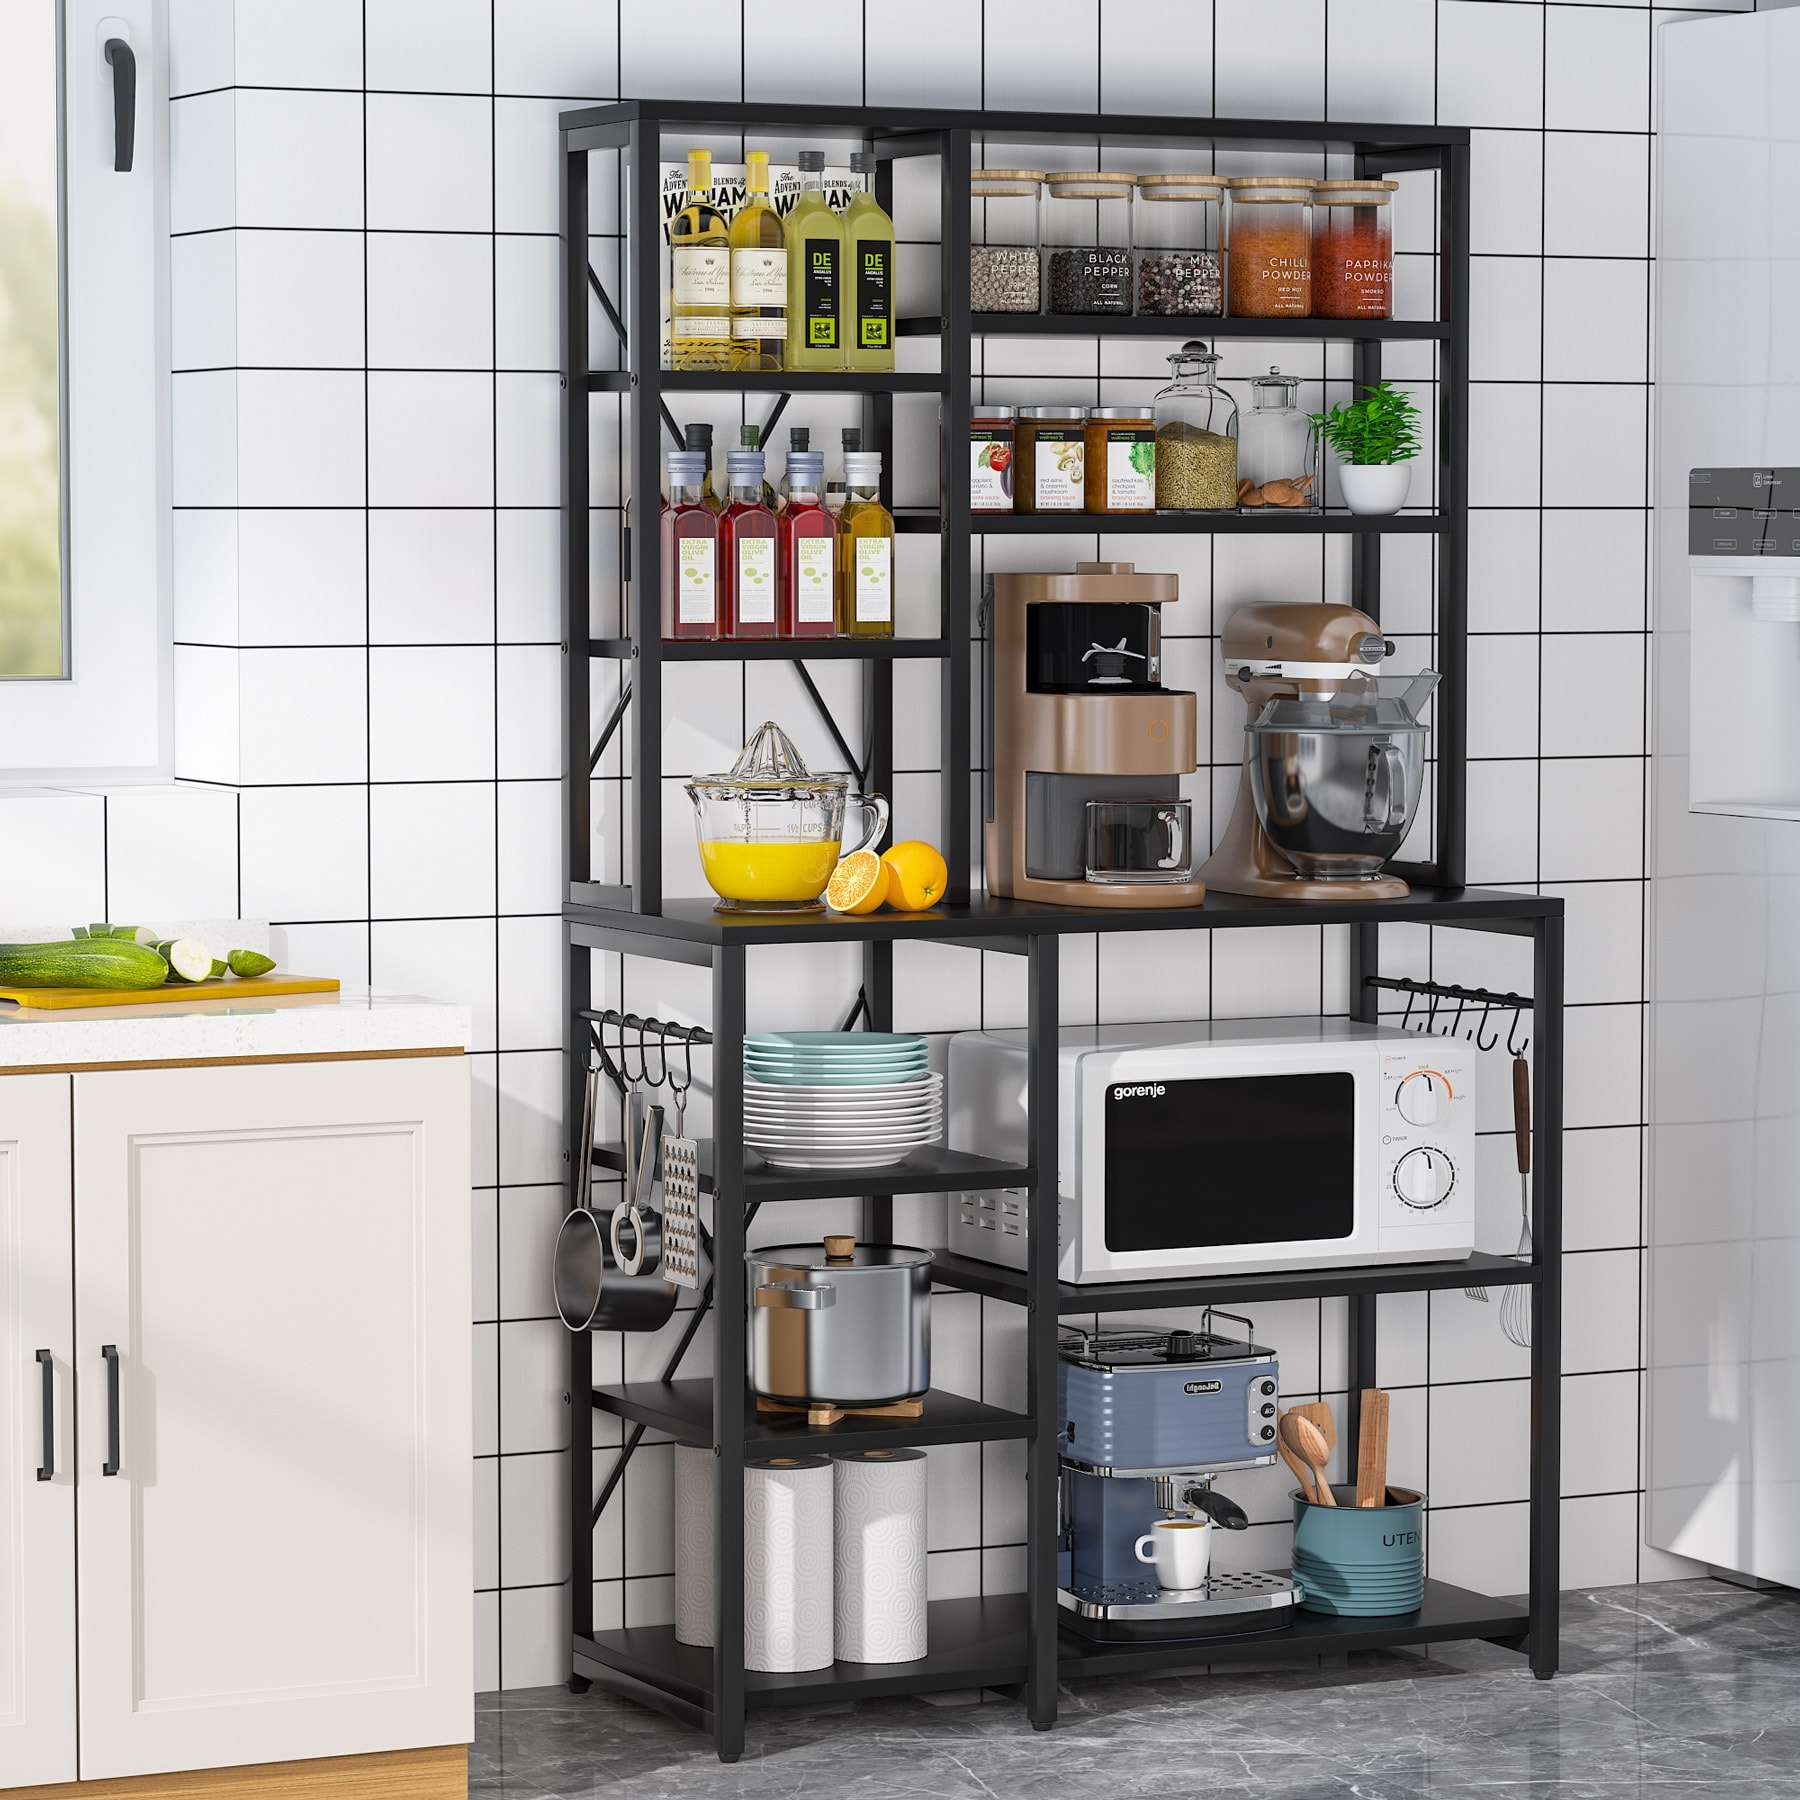 5 Tiers Kitchen Rotating Shelf Household Storage Rack with Wheels - 5-Tiers  - Bed Bath & Beyond - 36362654